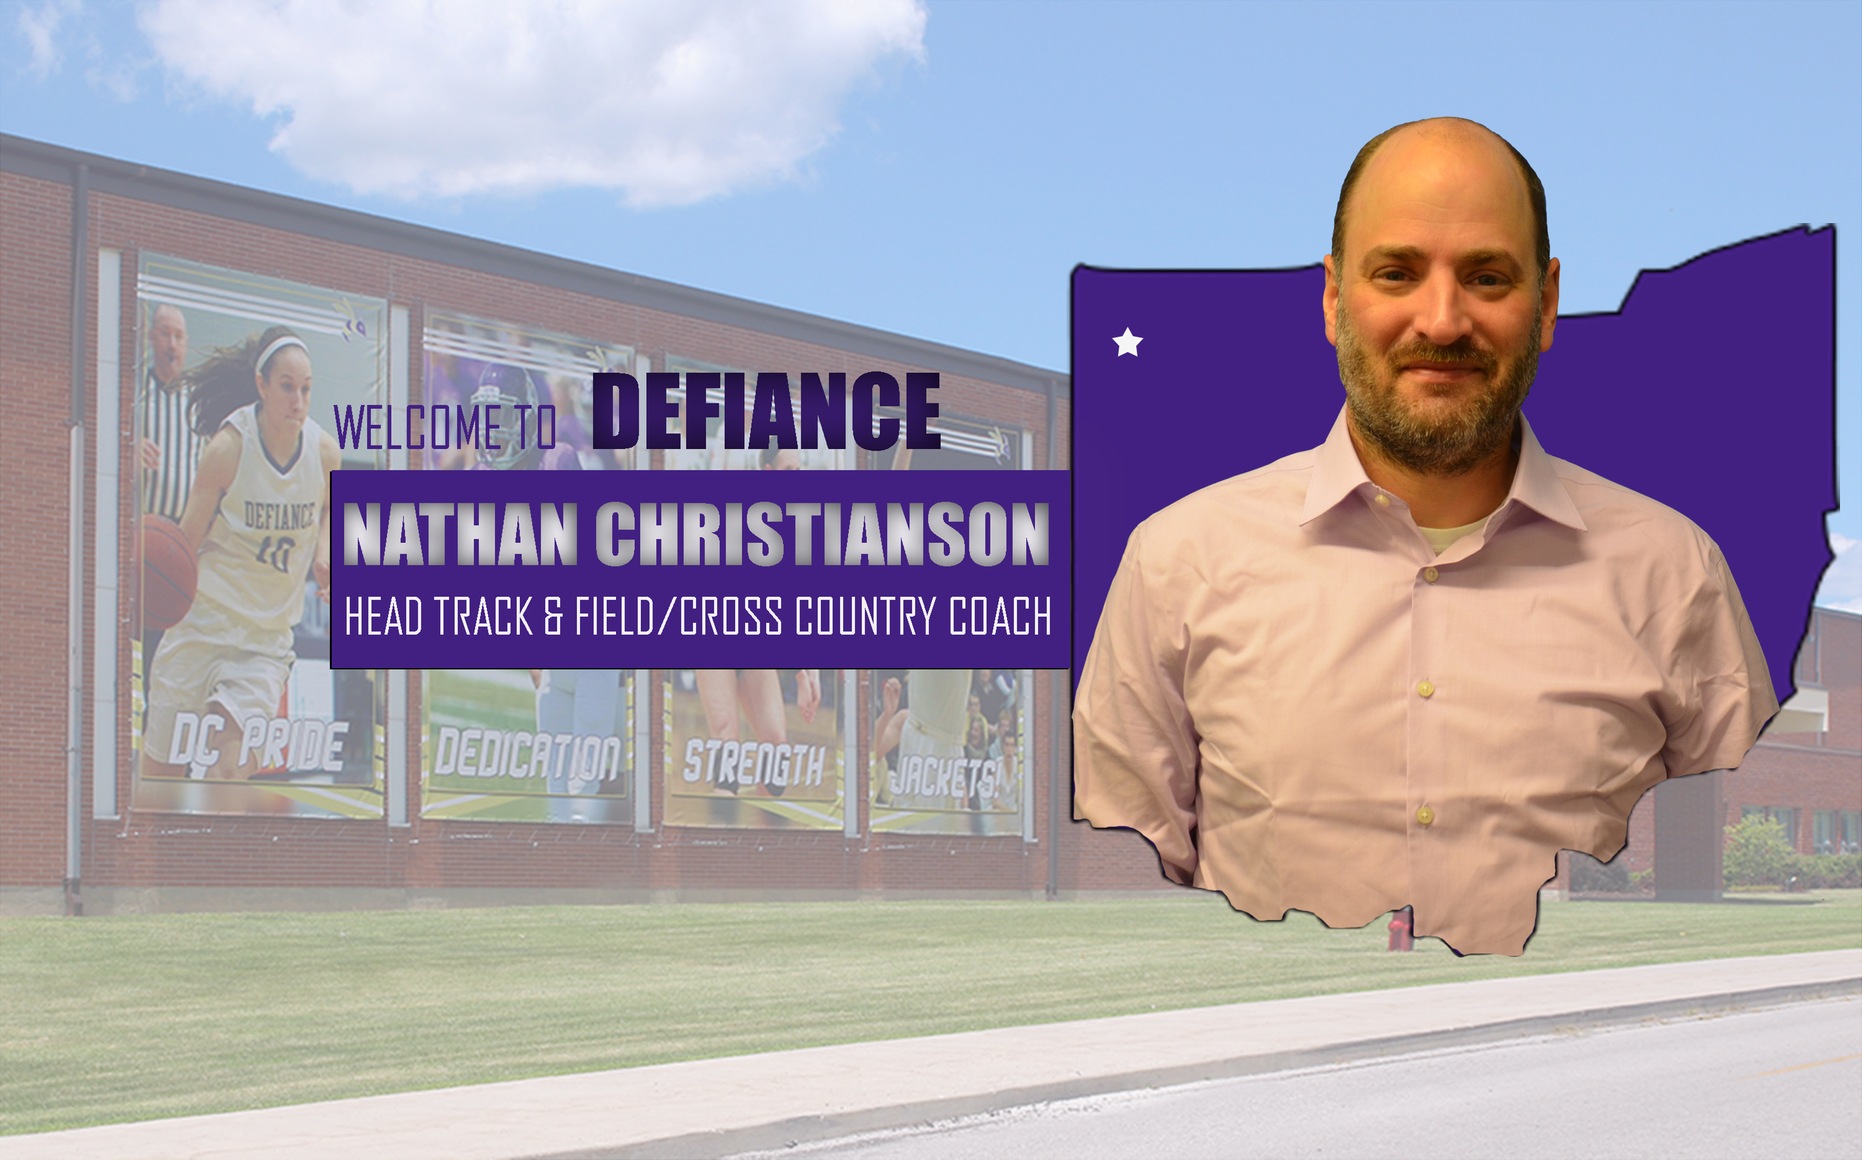 Christianson takes the helm of cross country and track and field programs